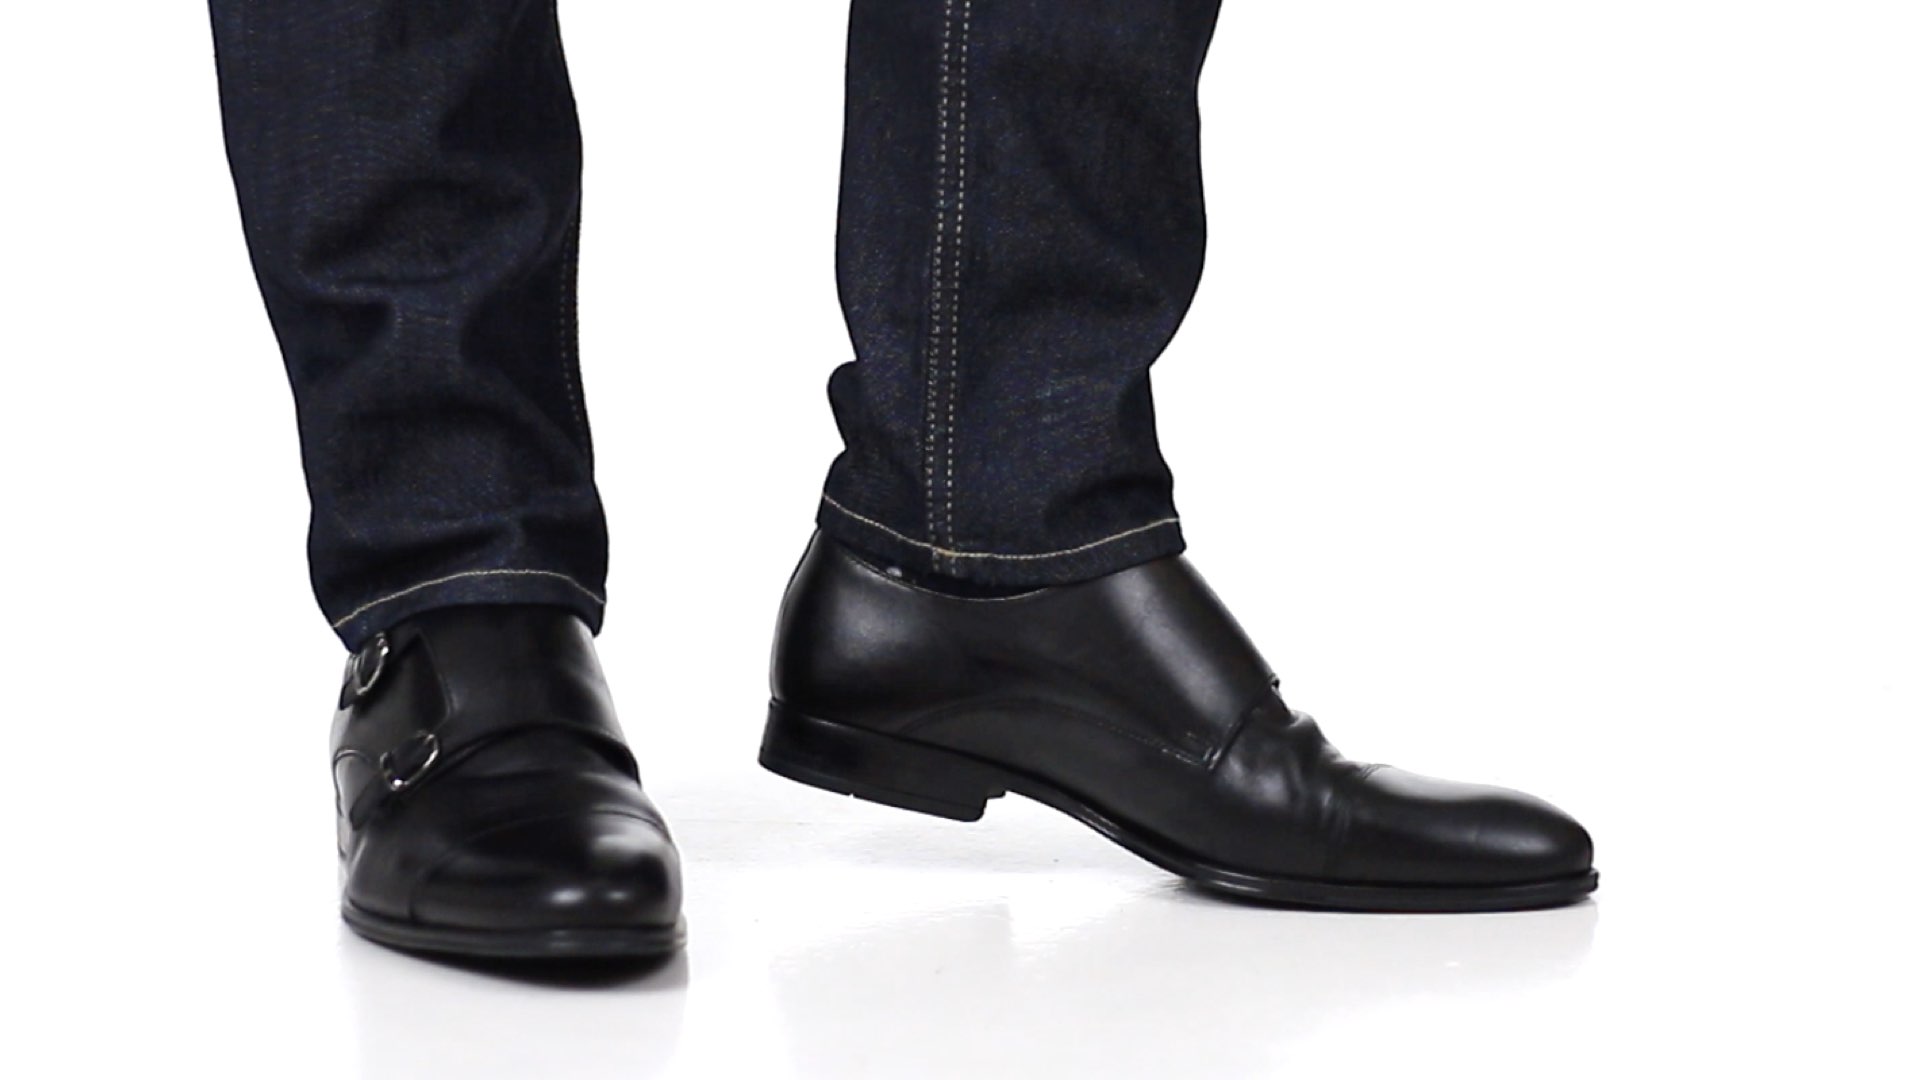 slip on dress shoes with jeans